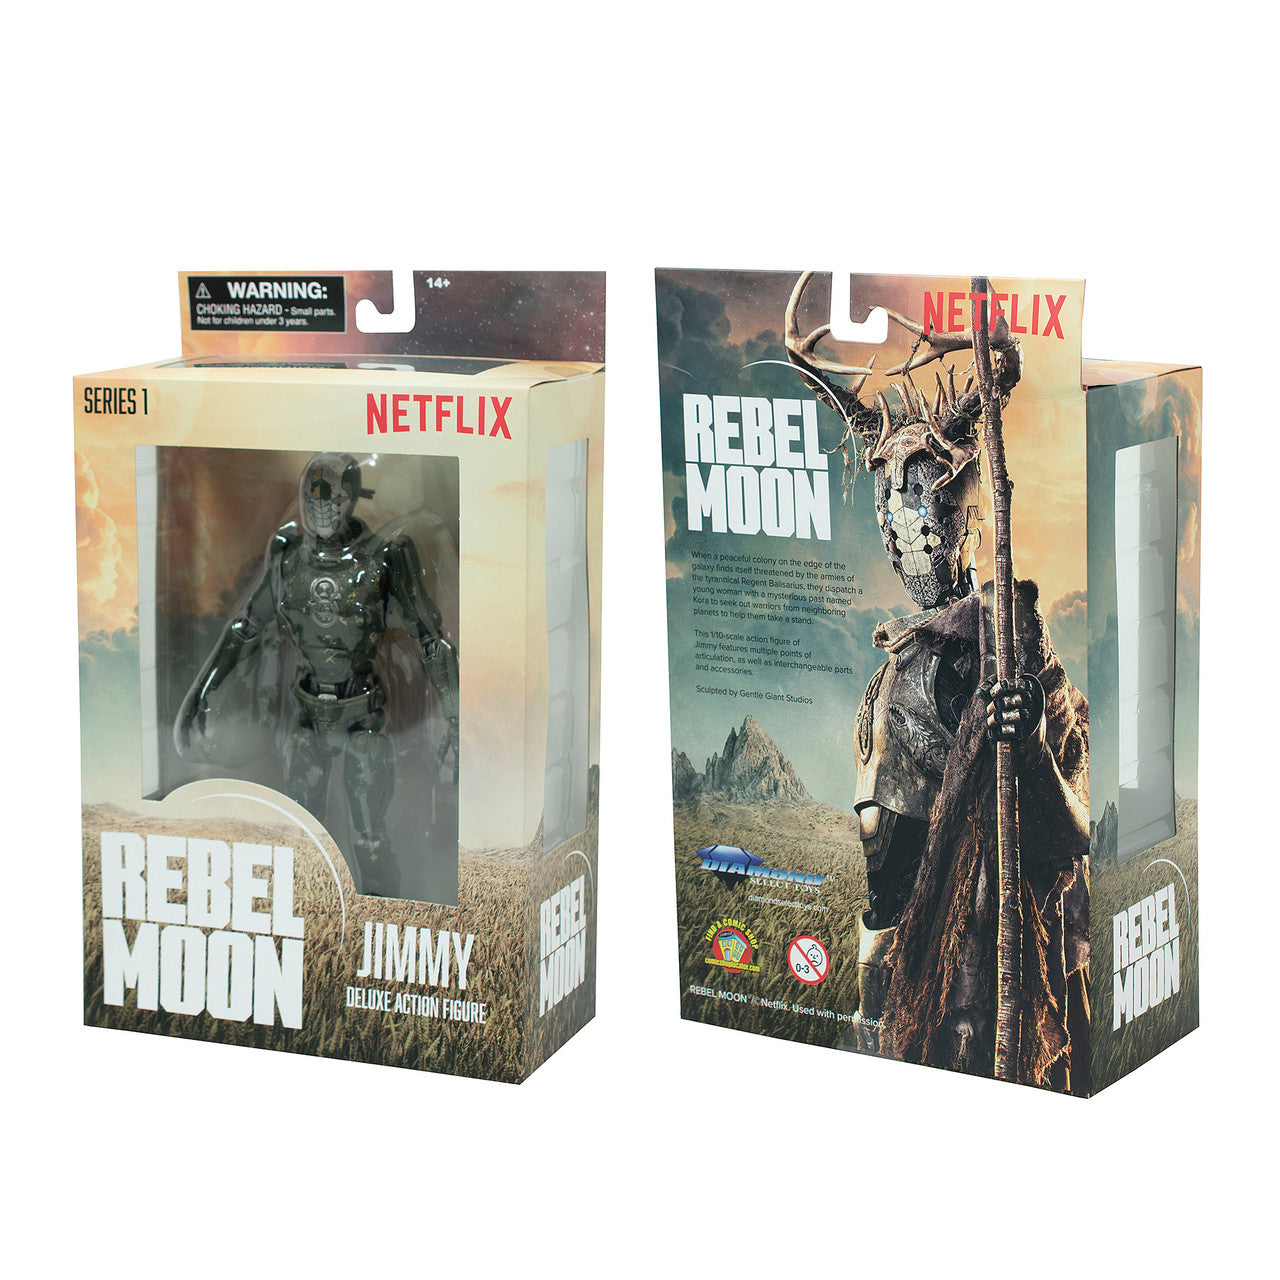 Diamond Select Toys: Rebel Moon (Series 1) - Jimmy Deluxe Action Figure